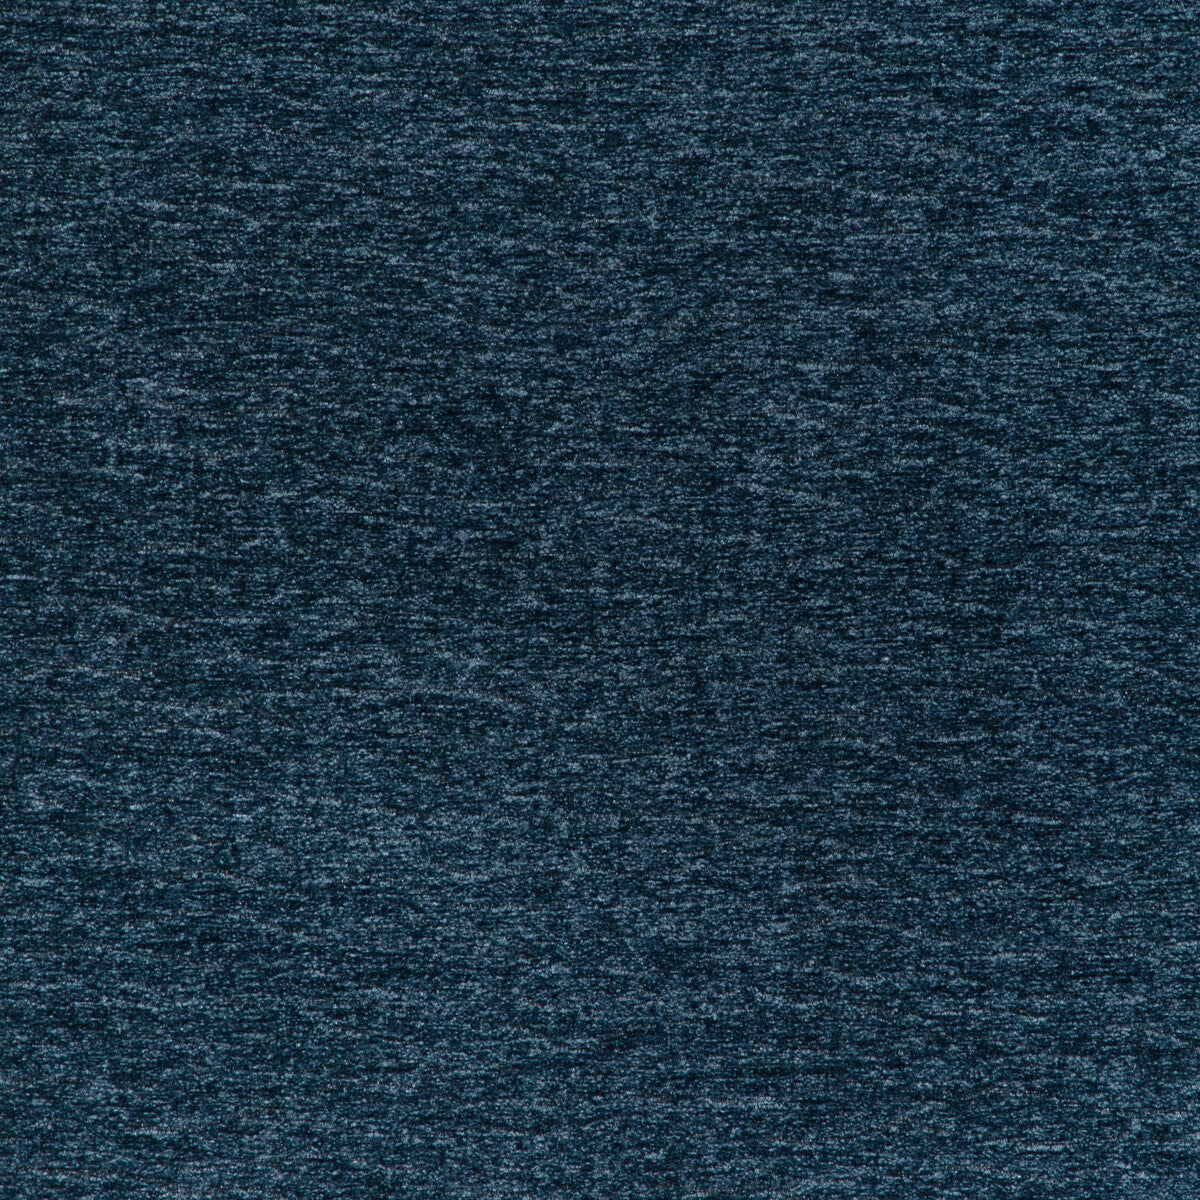 Rippling Wave fabric in denim color - pattern 36824.5.0 - by Kravet Design in the Woven Colors collection